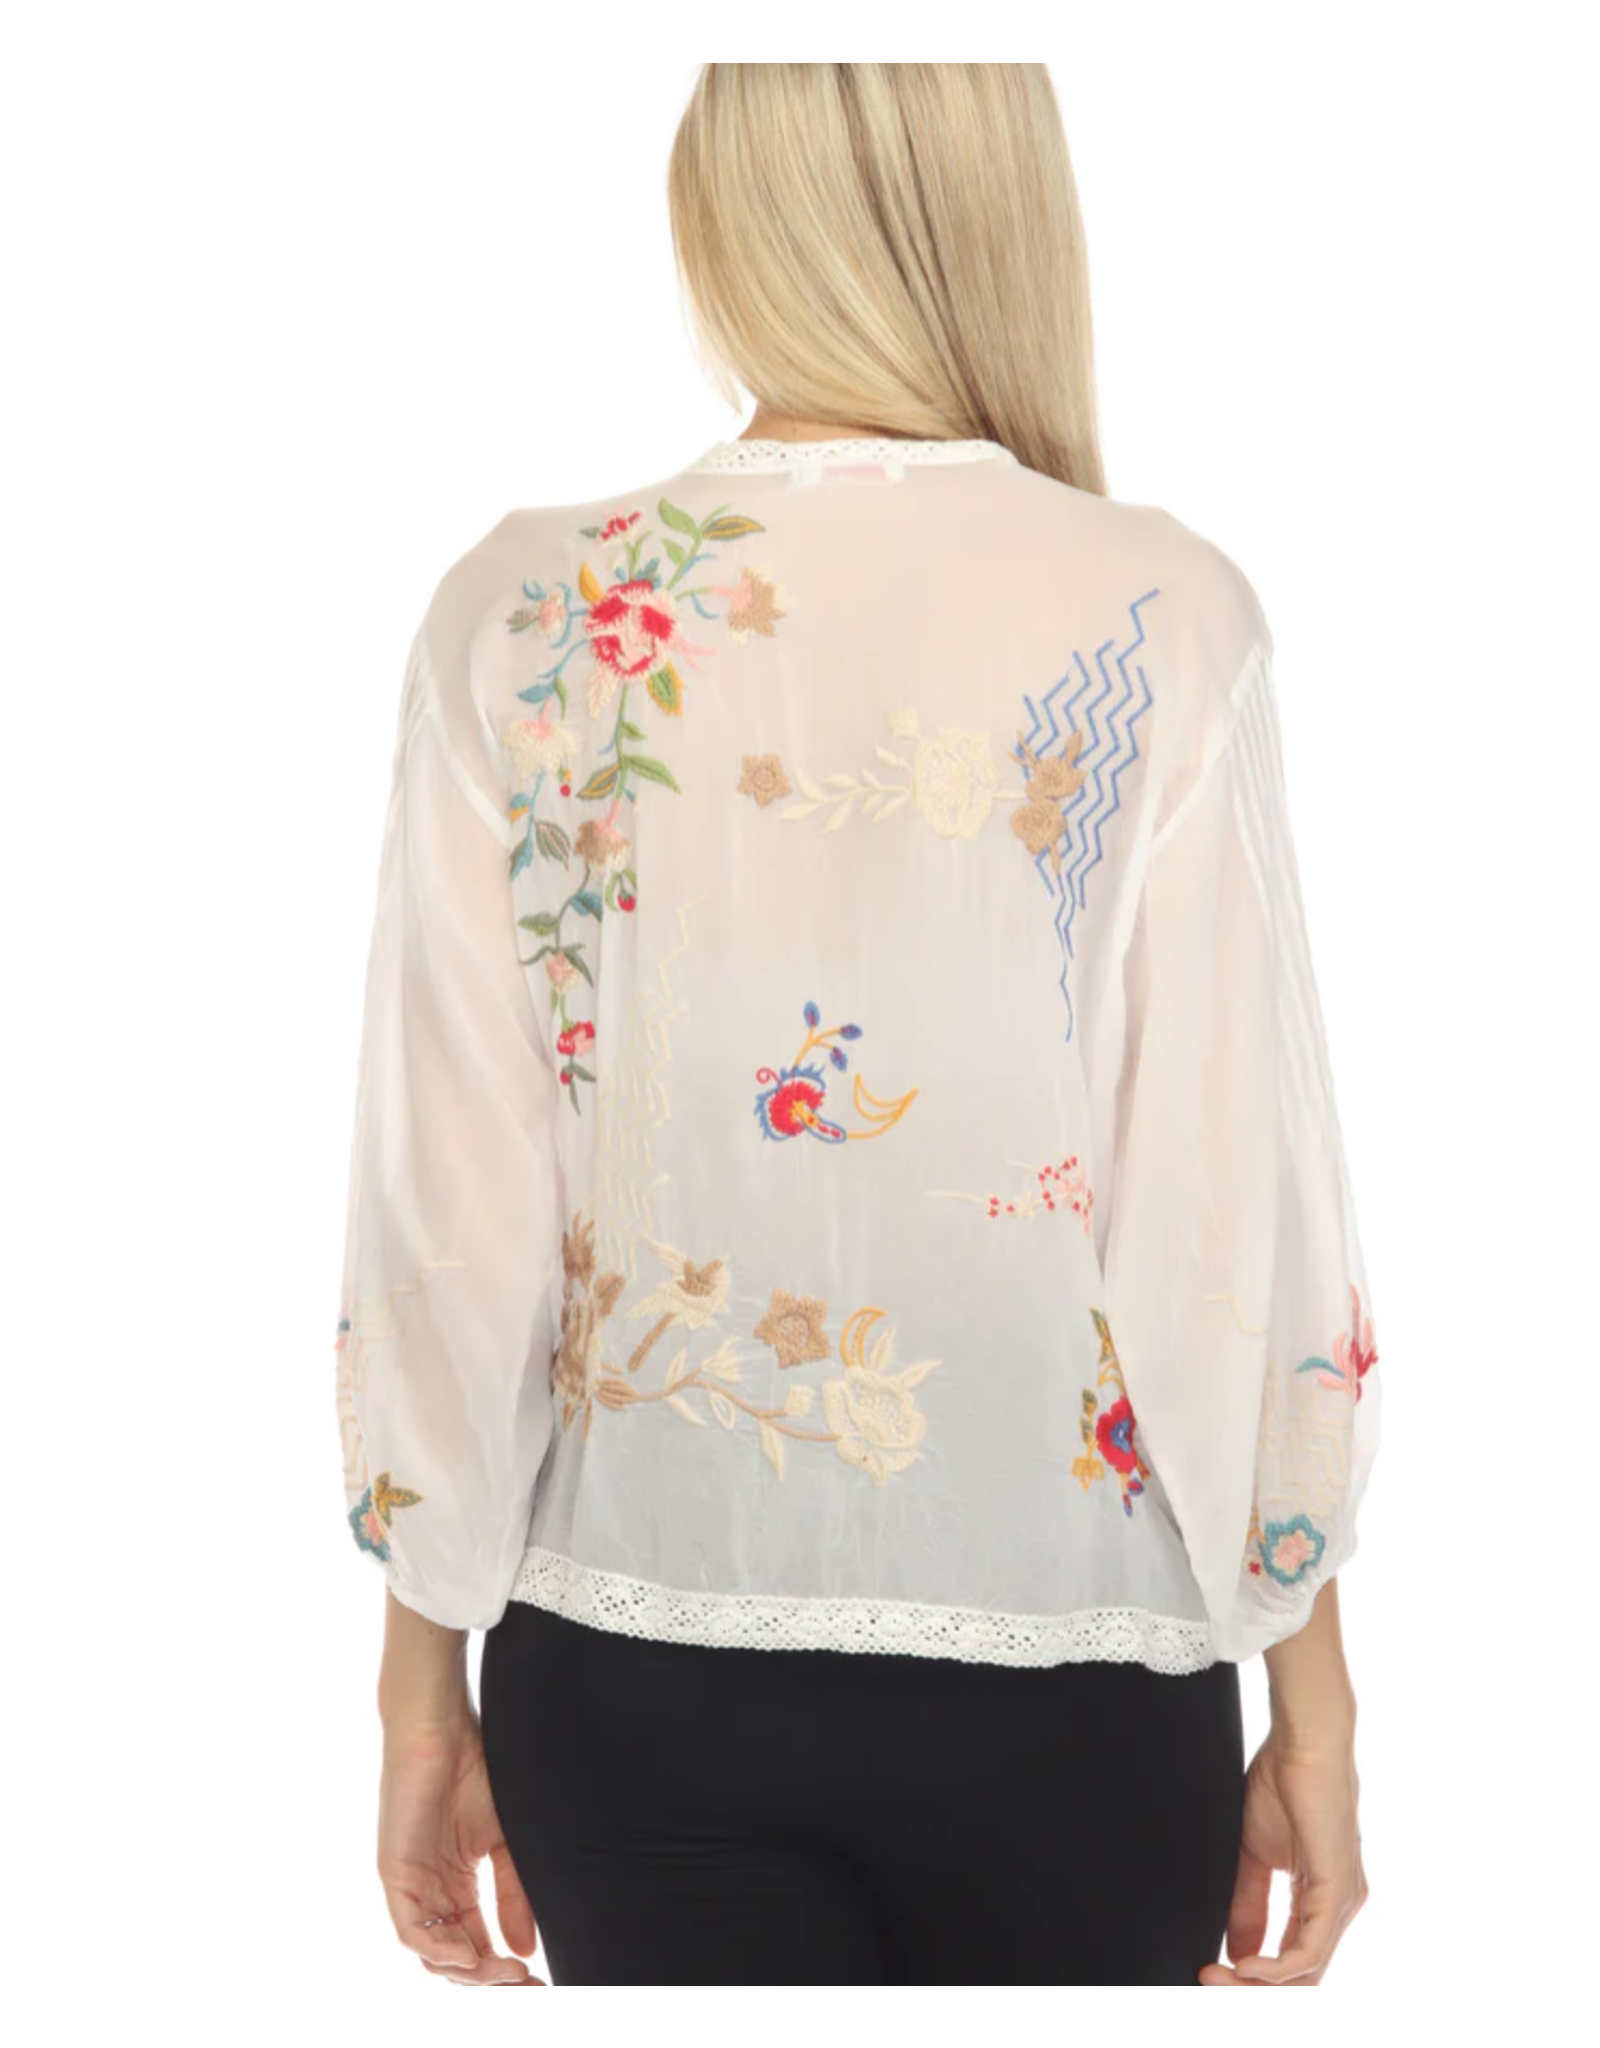 Johnny Was JWas C11623-2 Velouette Embroidered White Blouse